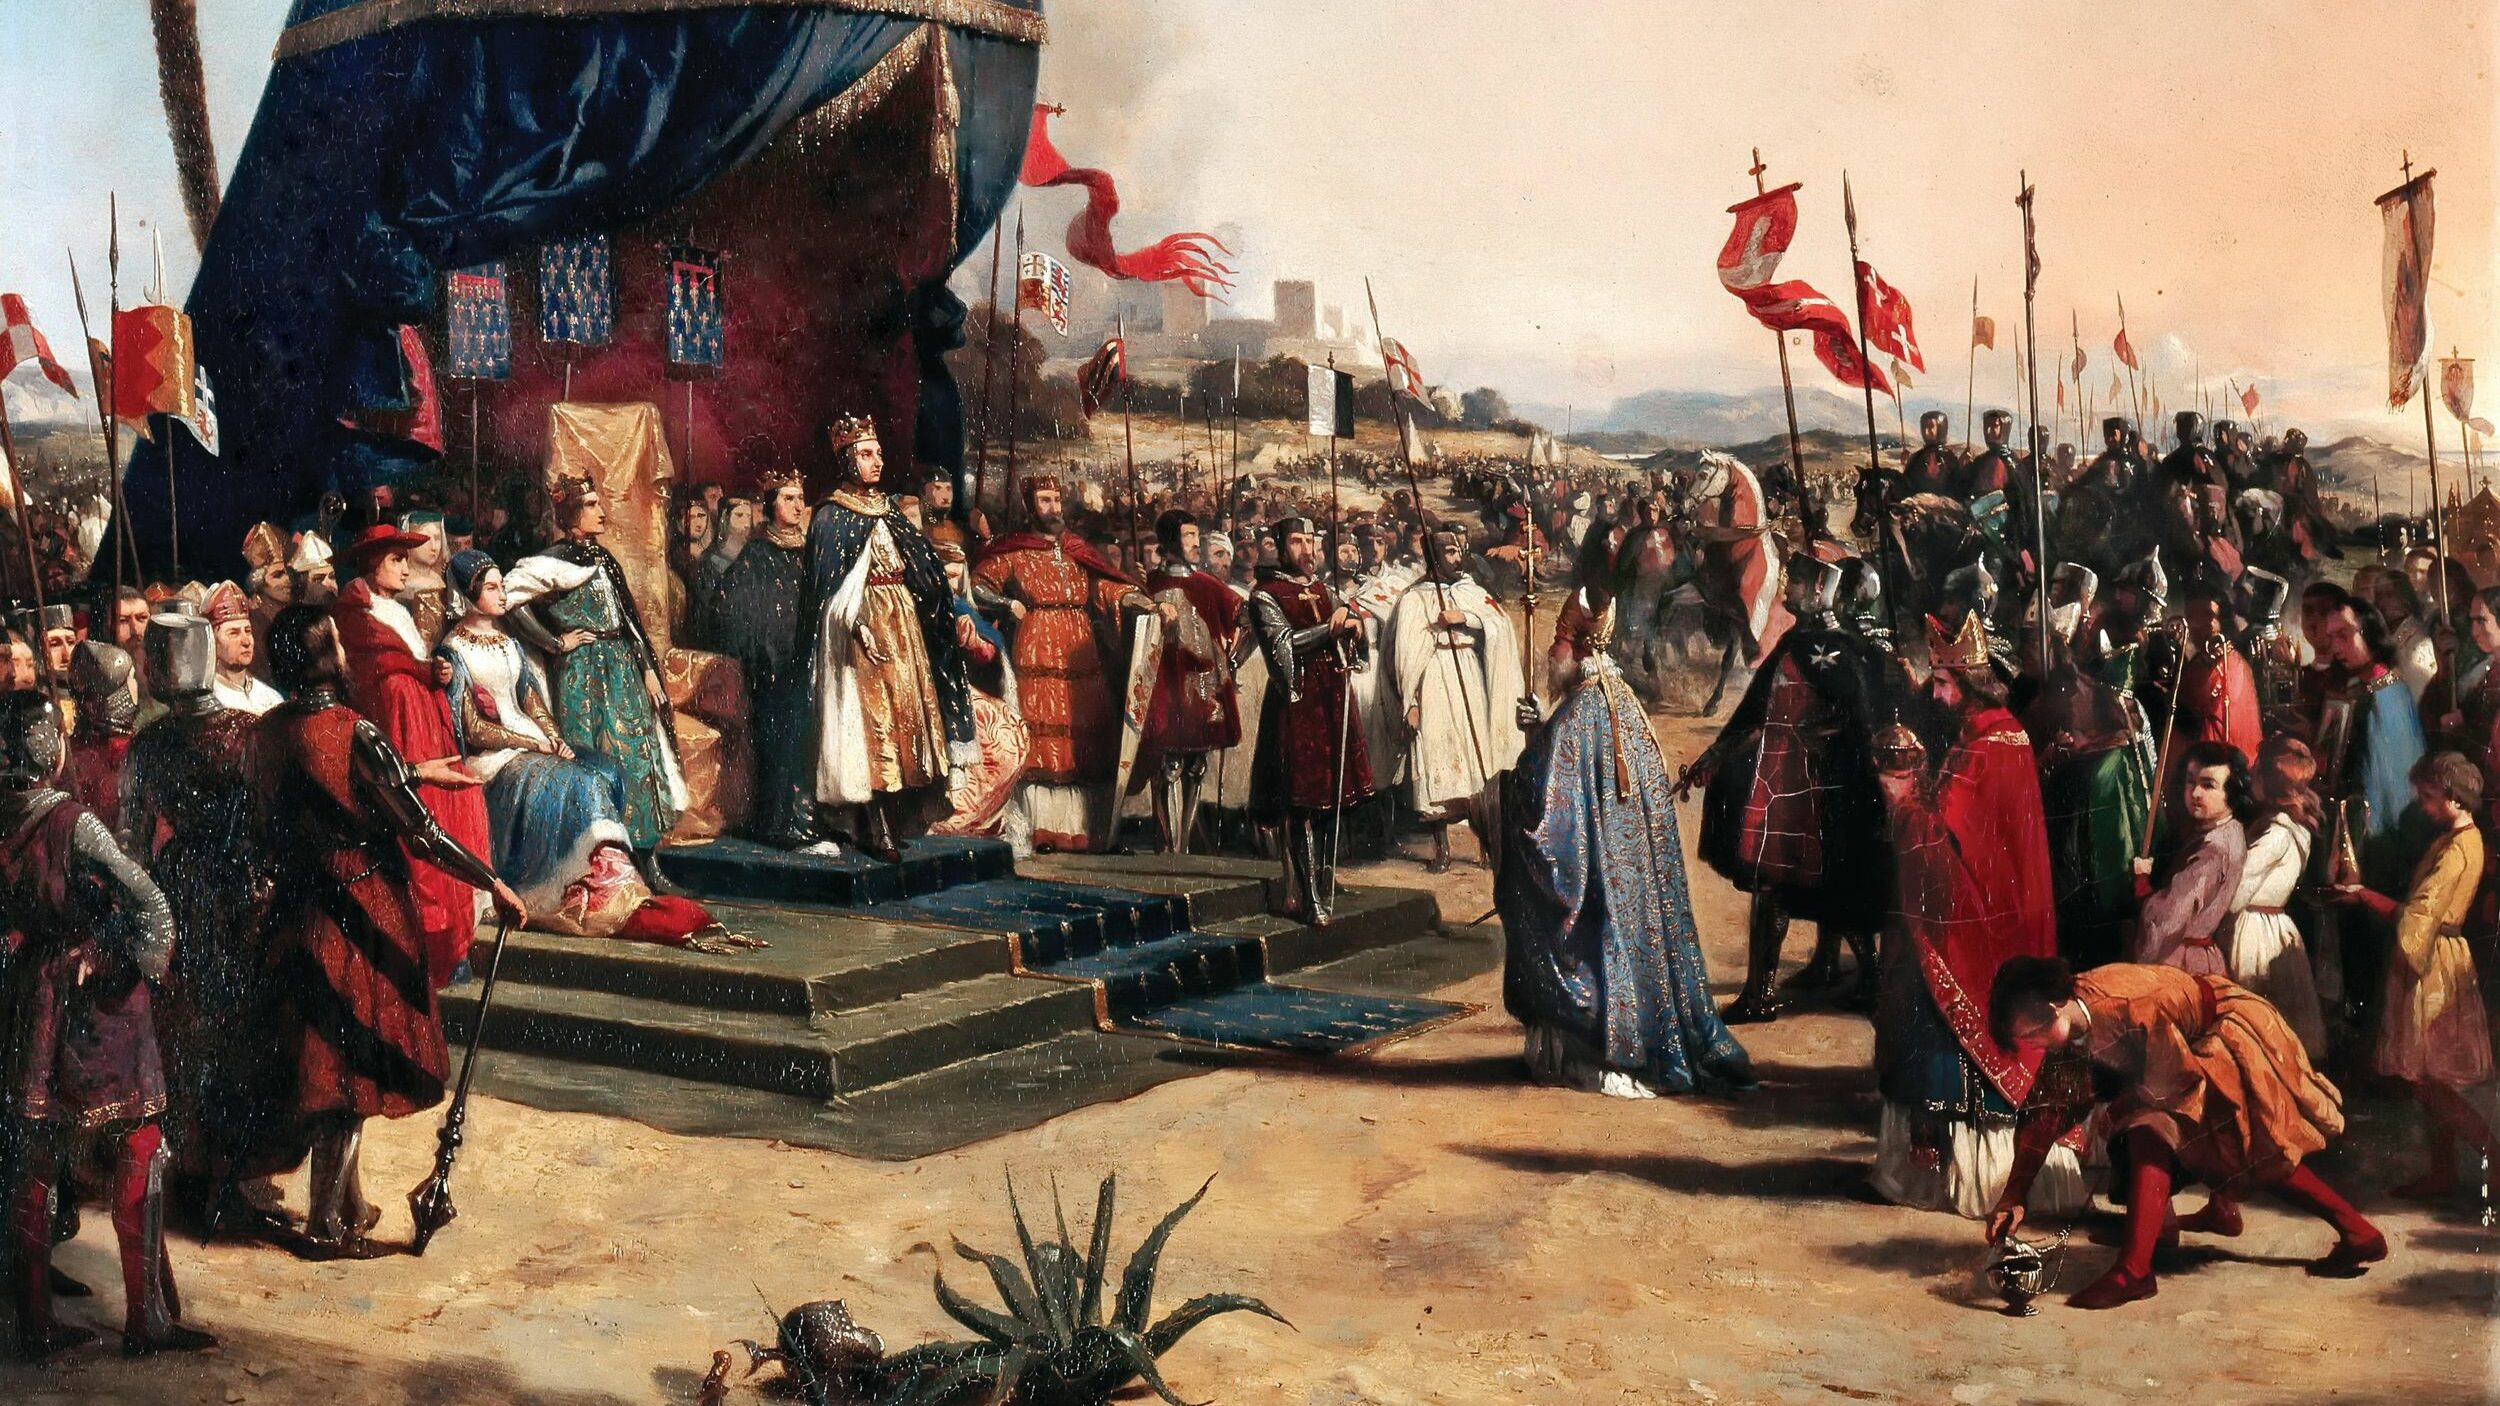 Saint Louis, King Louis IX of France receives Robert of Nantes, Patriarch of Jerusalem, in Damietta, Egypt, in June of 1249. Robert is lending his knights to the battle ahead, the Seventh Crusade. Nineteenth century painting by French artist Oscar Gué.